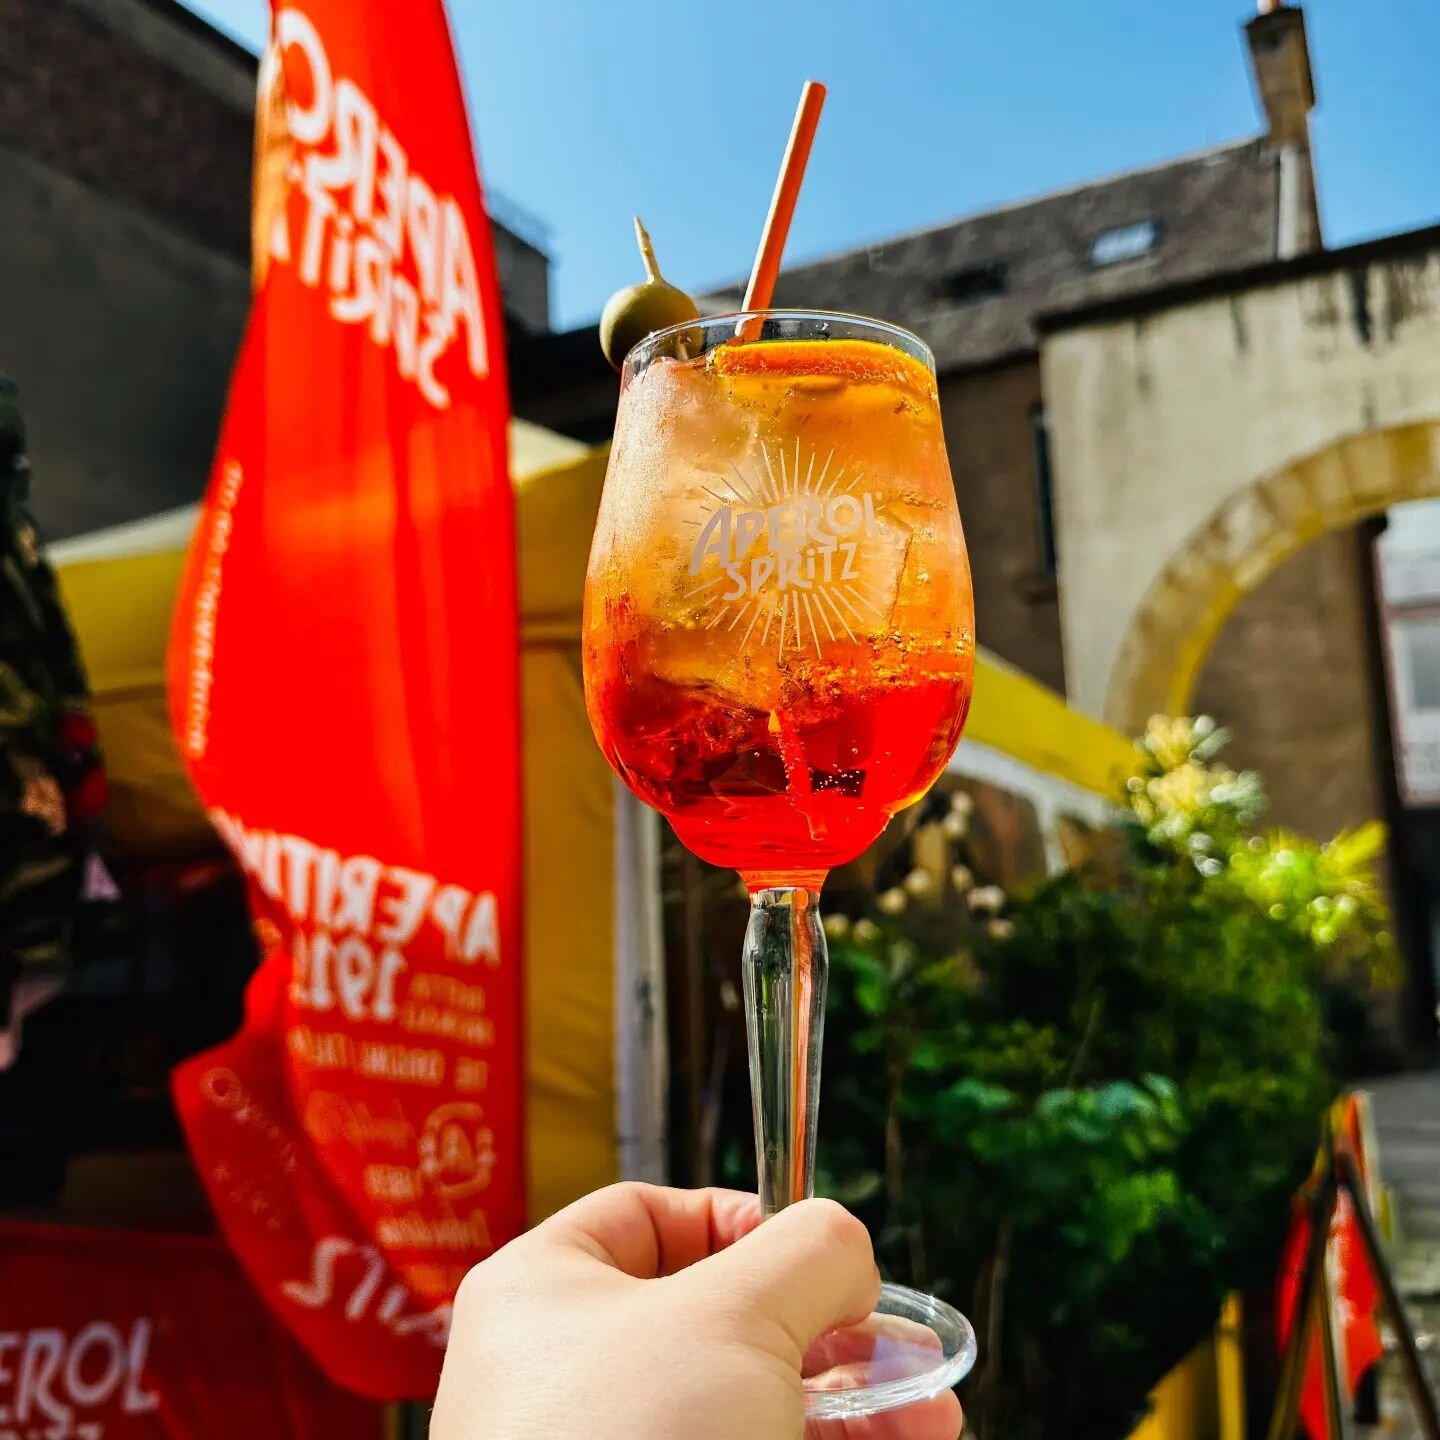 As much as I want to type &quot;Come along this weekend and enjoy an Aperol Spritz in the 🌞' unfortunately I can't because it's to 🌧 all weekend. So instead, come and enjoy an Aperol Spritz in the rain, because if you lived your life by the weather